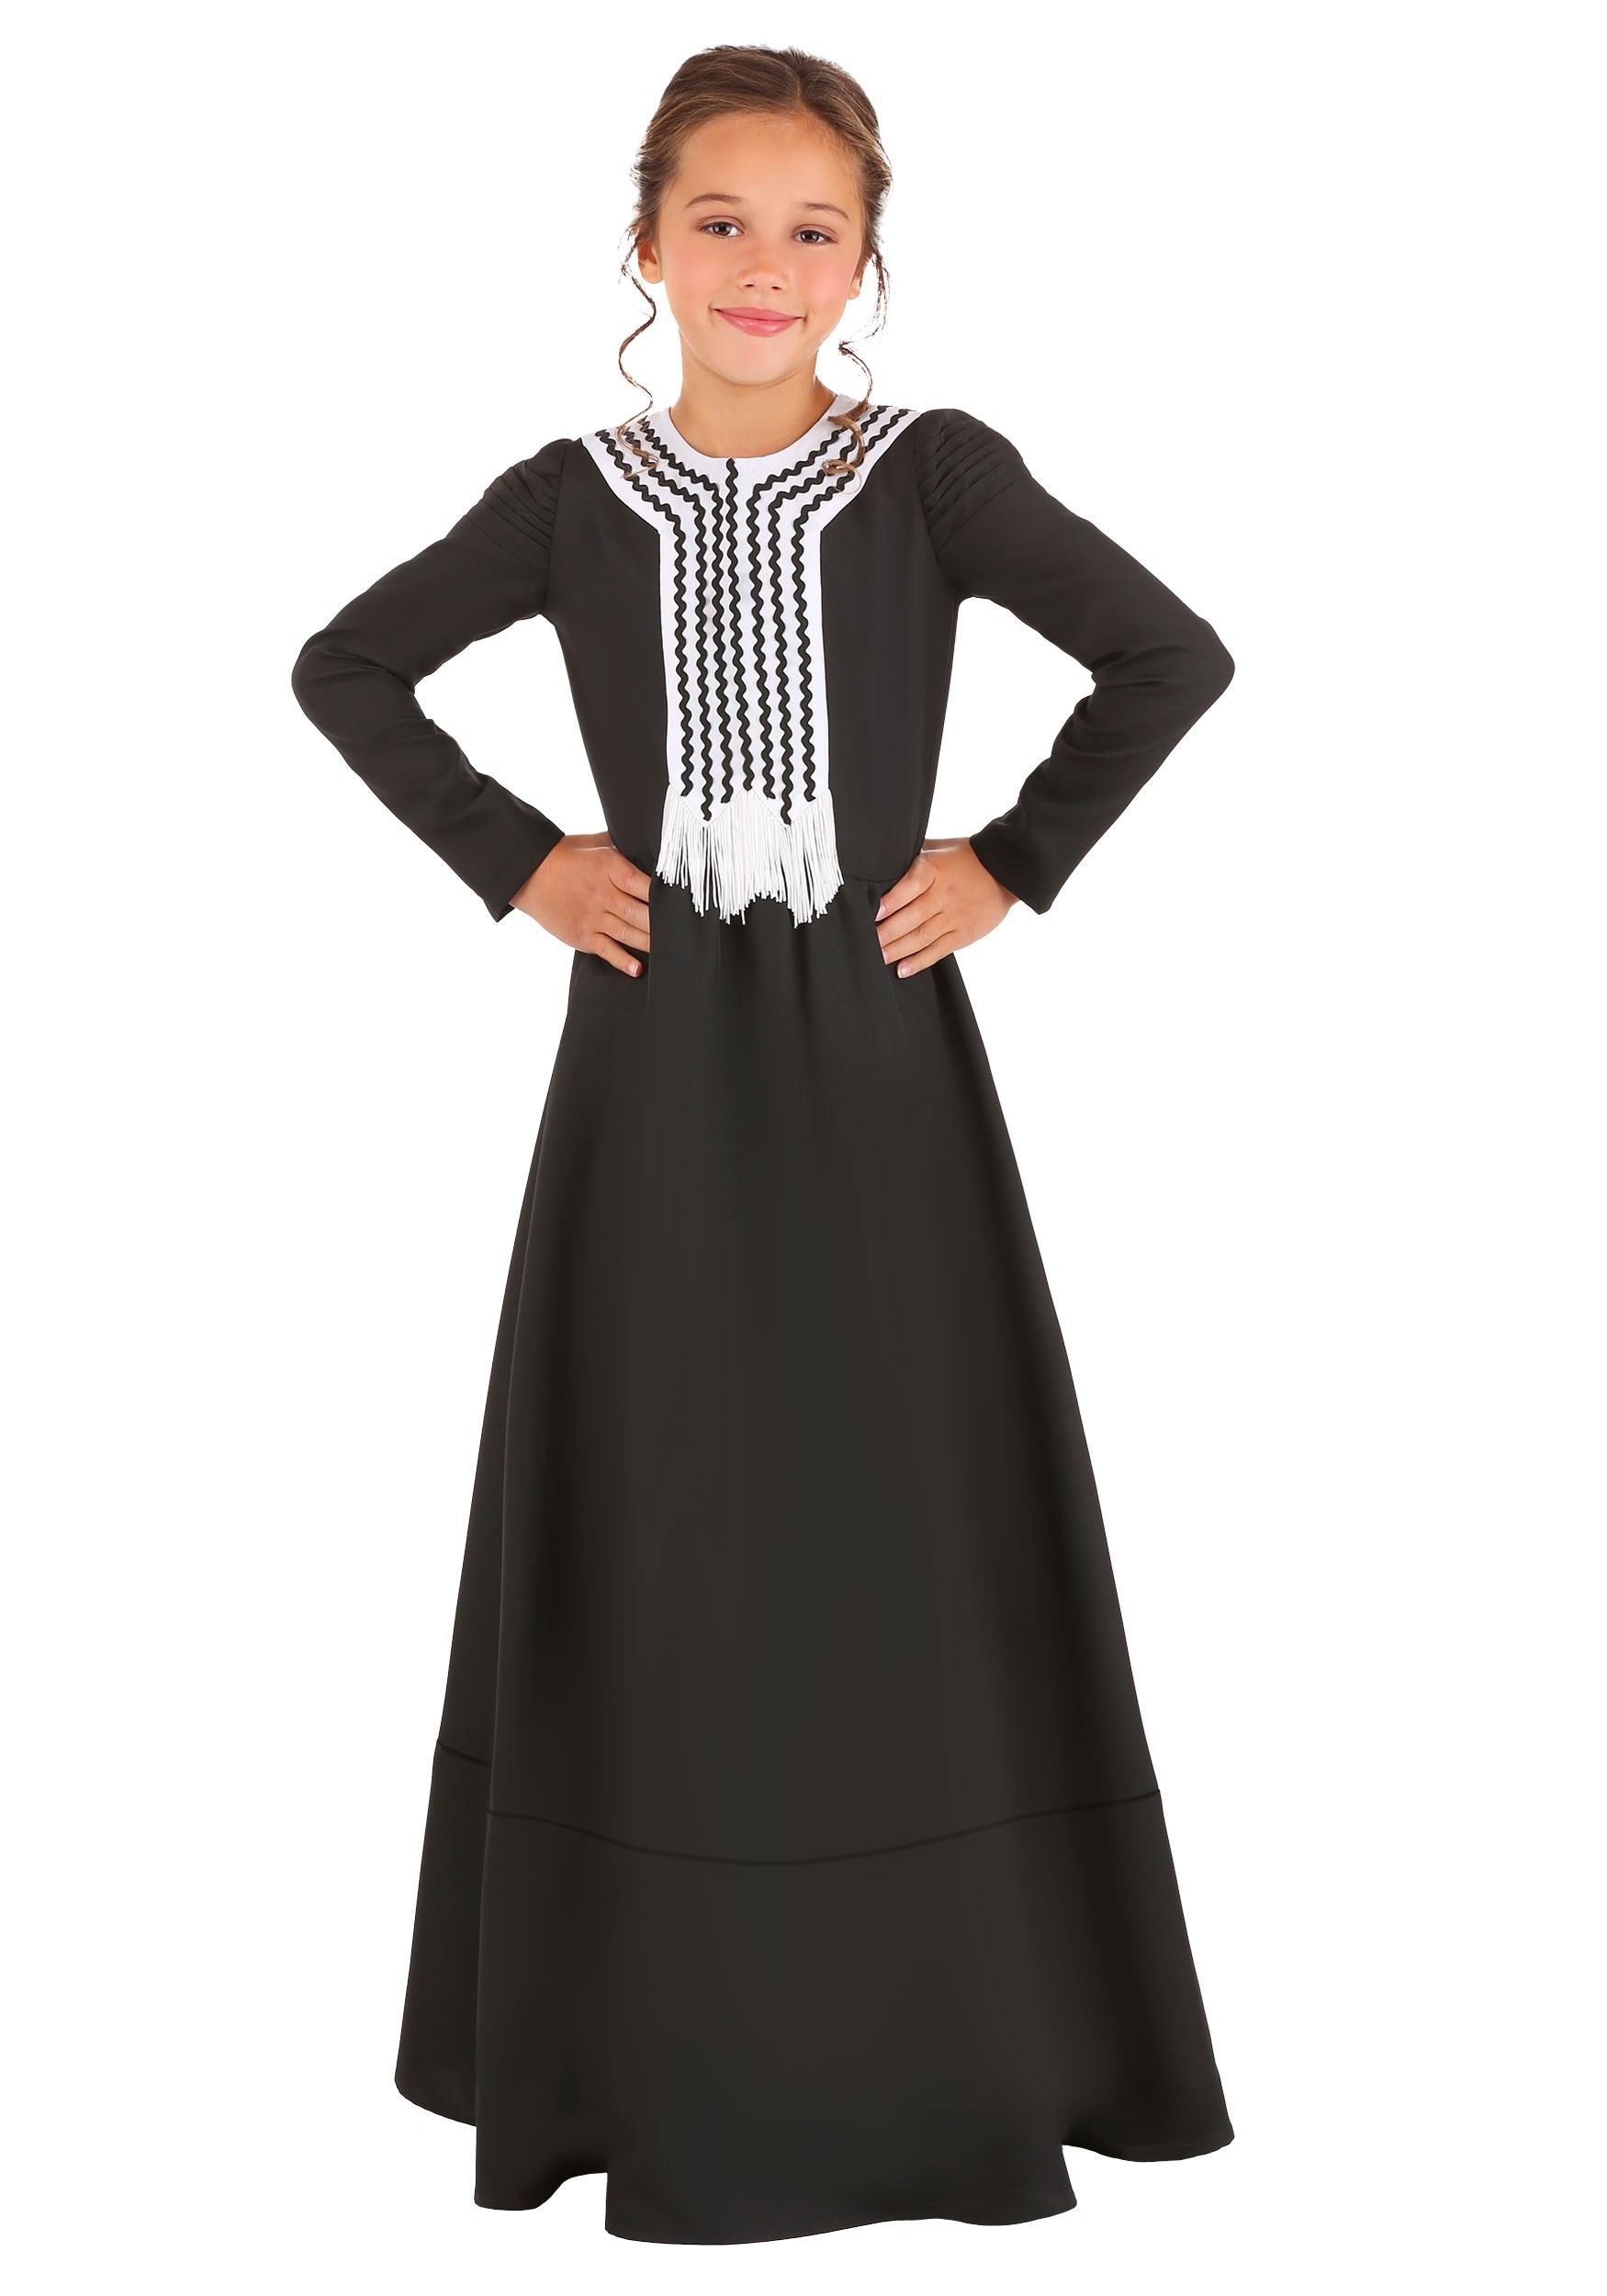 Photos - Fancy Dress FUN Costumes Marie Curie Costume for Girls Black/White